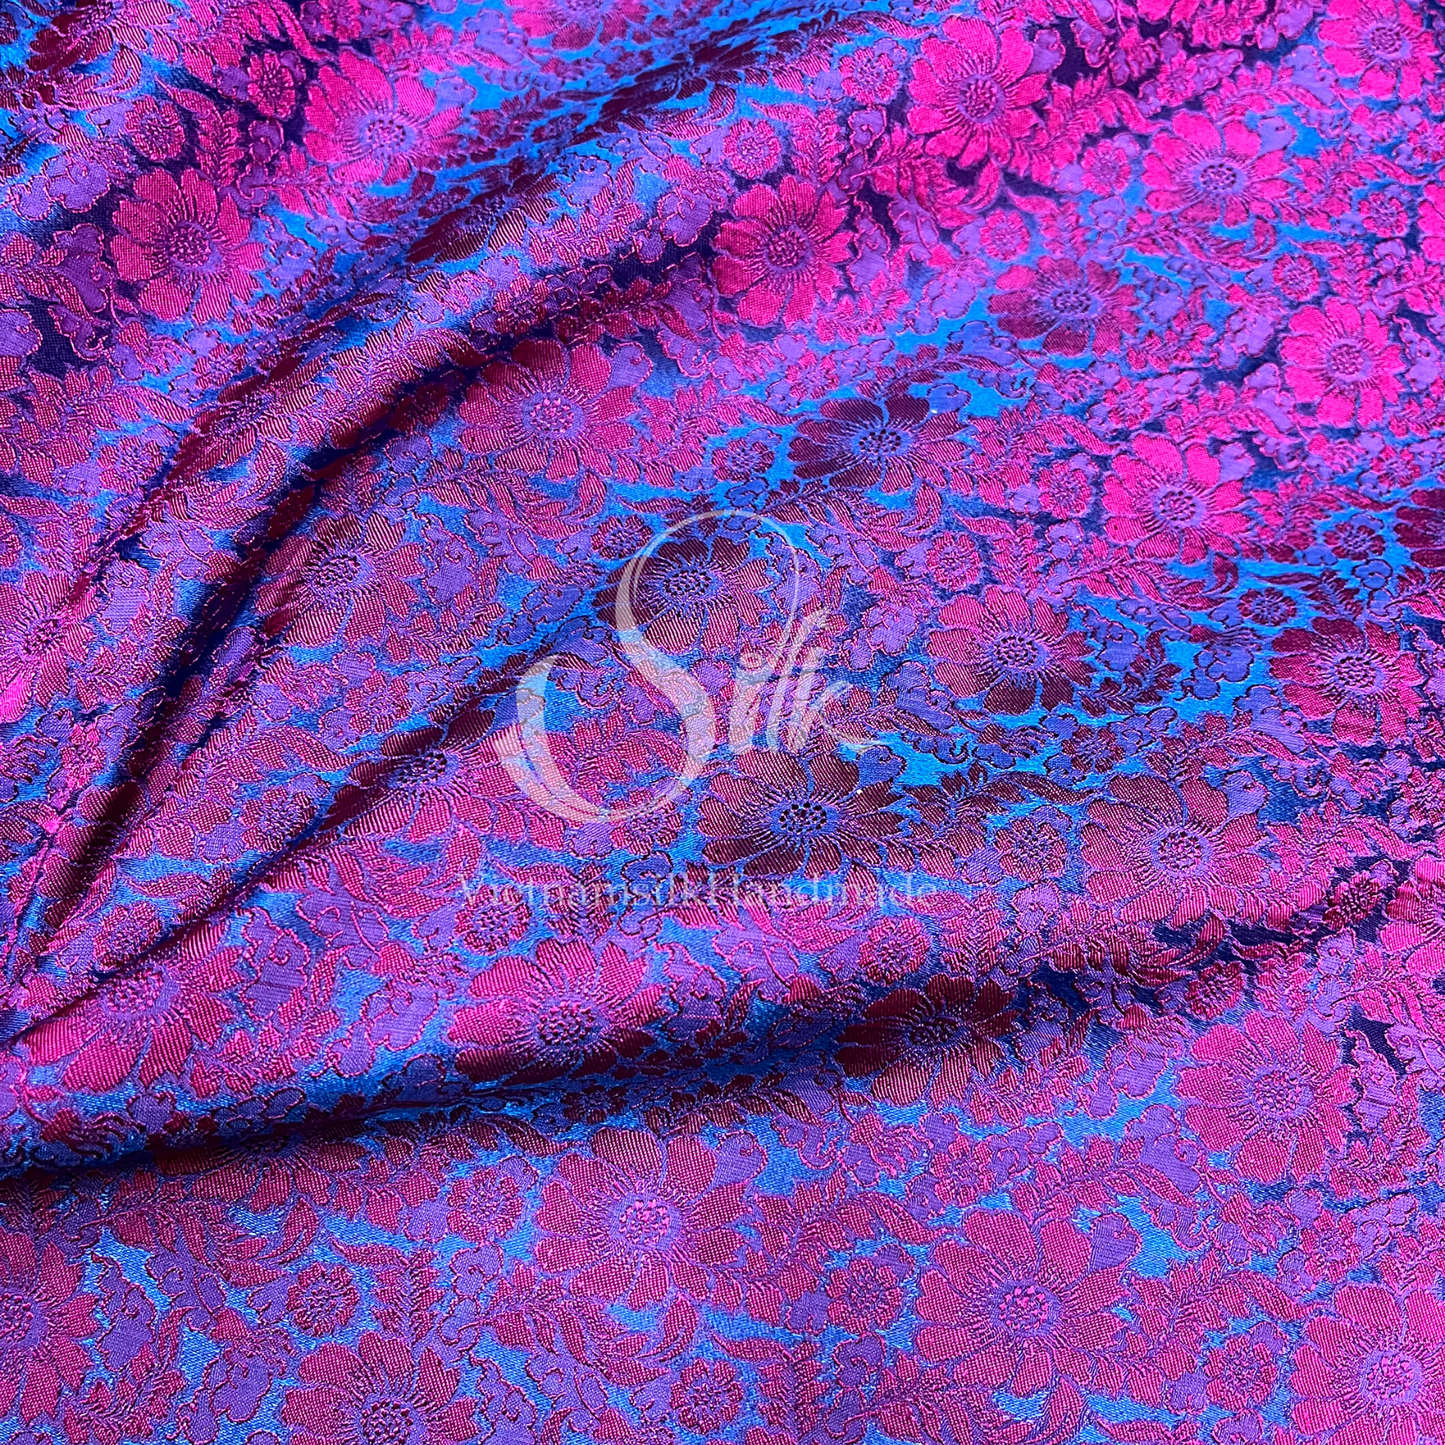 Blue Silk with Daisy Patterns - PURE MULBERRY SILK fabric by the yard -  Floral Silk -Luxury Silk - Natural silk - Handmade in VietNam